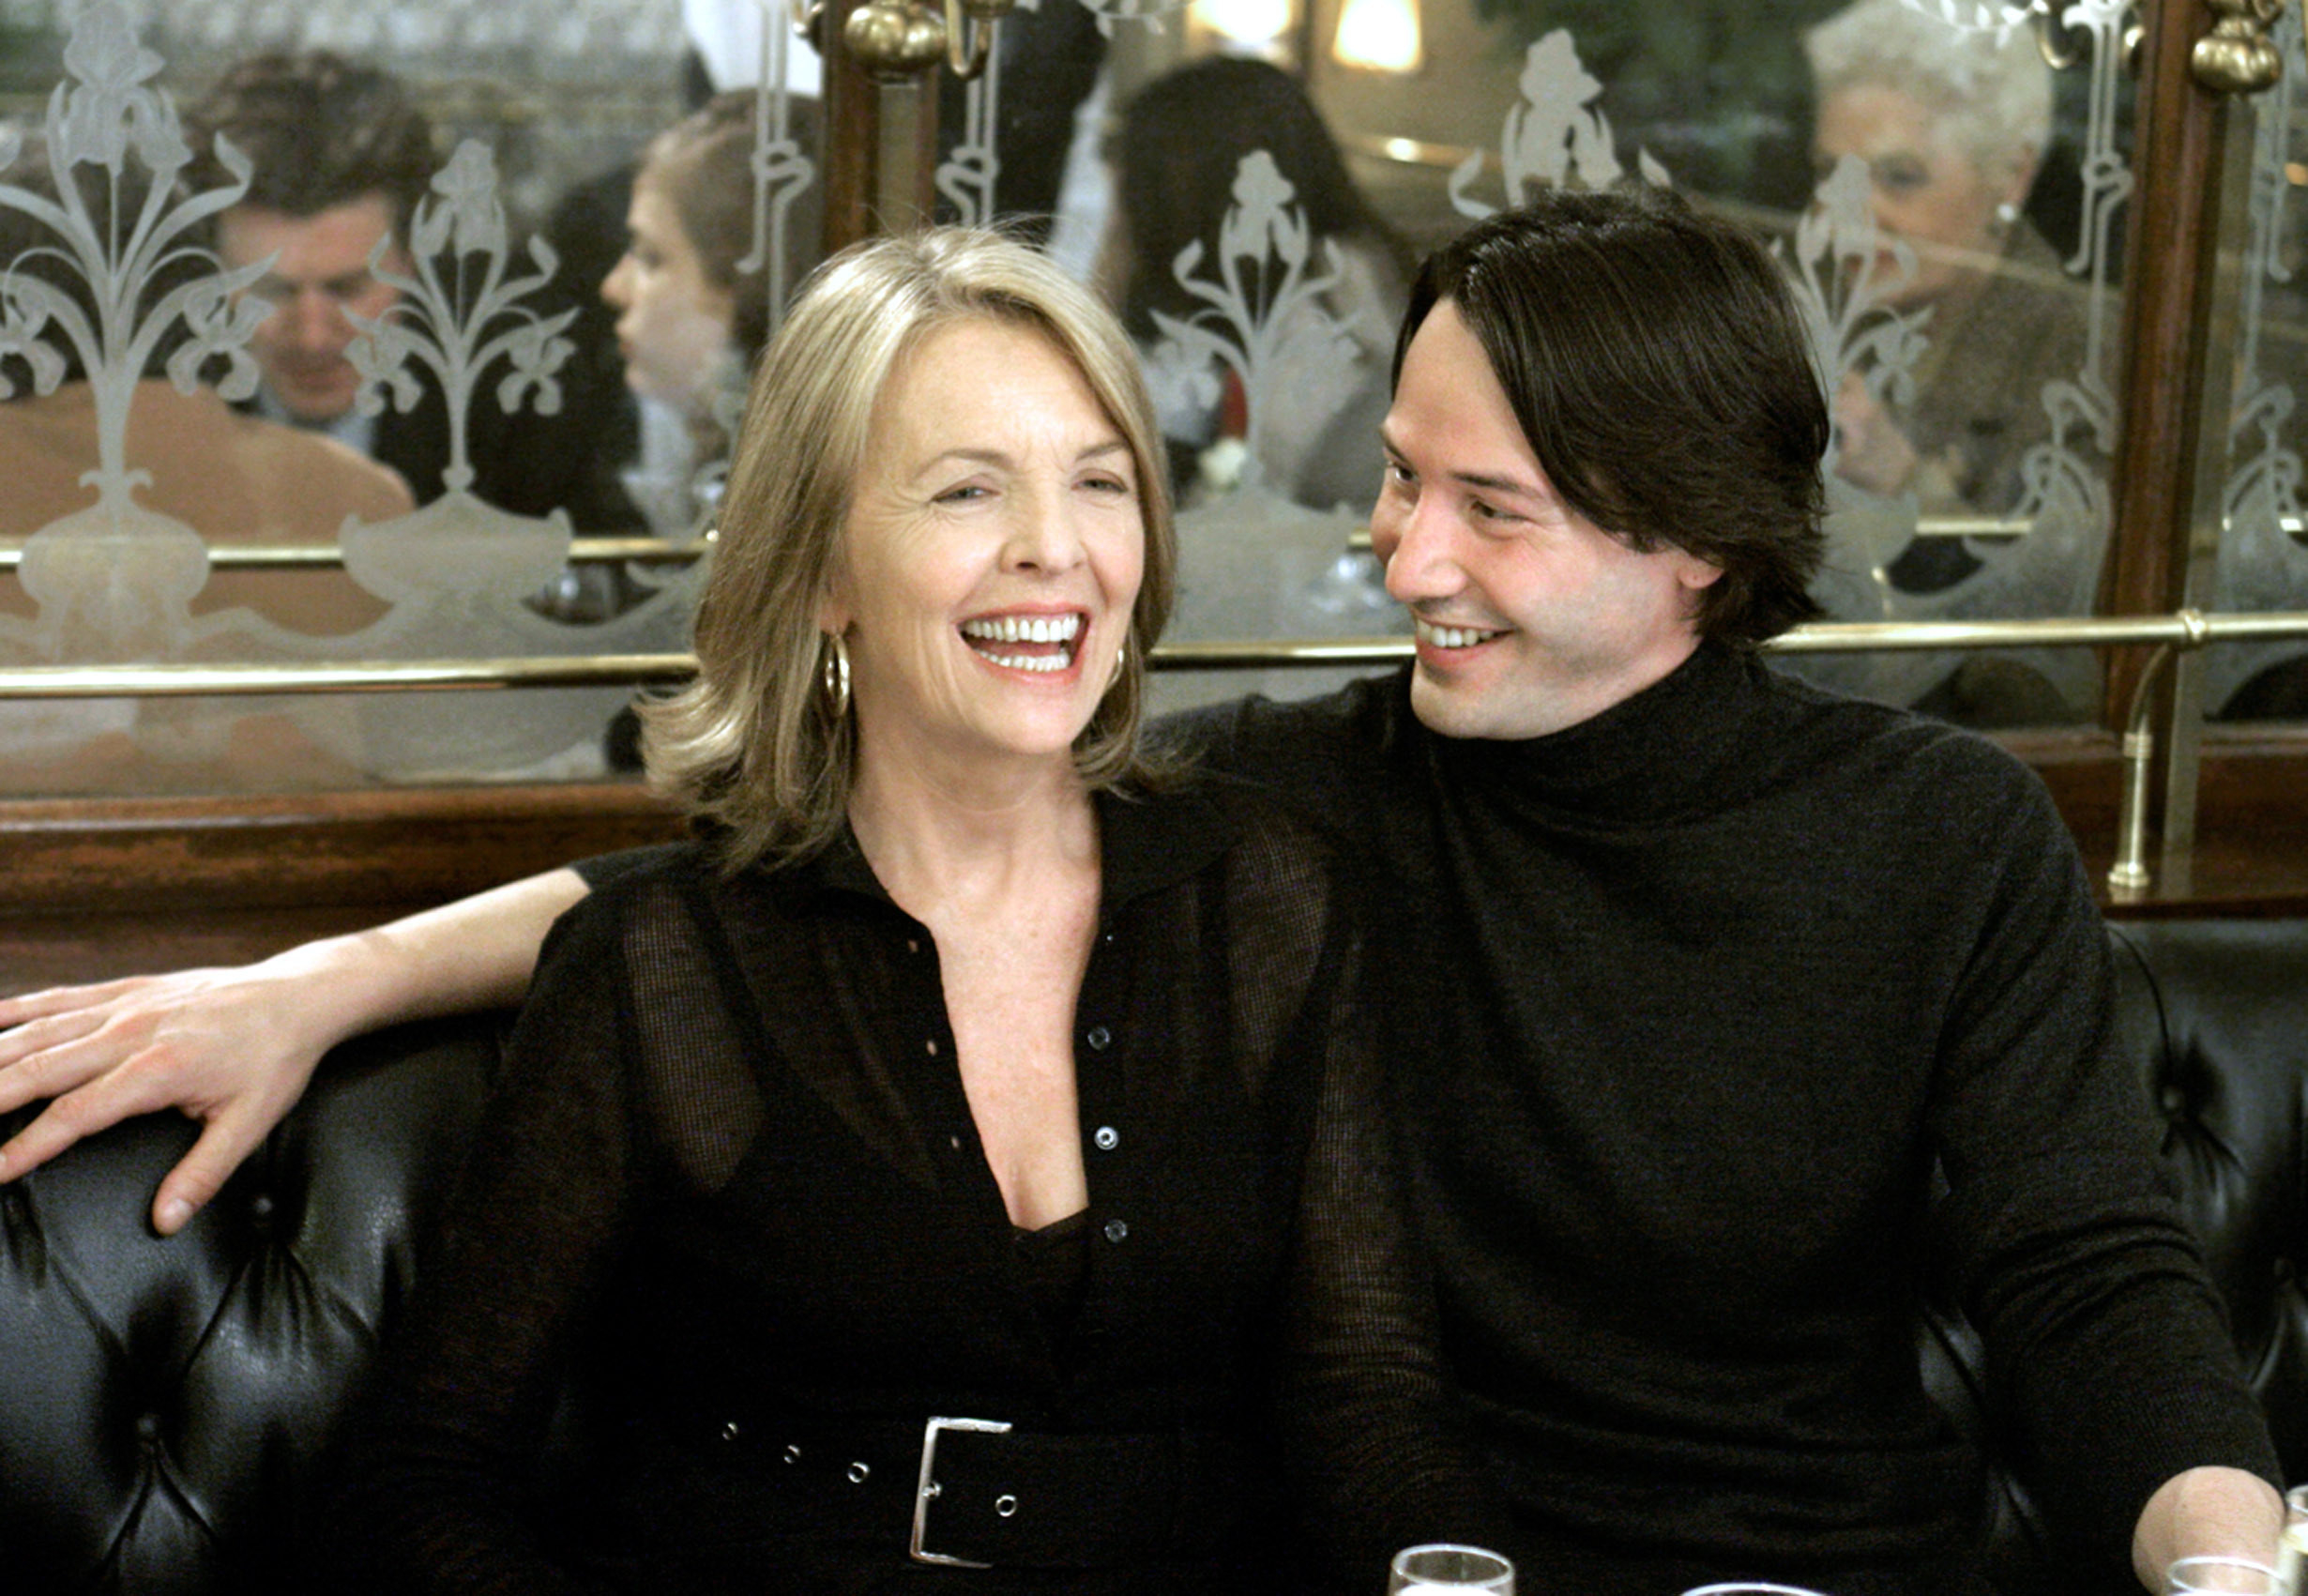 An older blonde woman and a younger man sit in a restaurant who has his arm around her